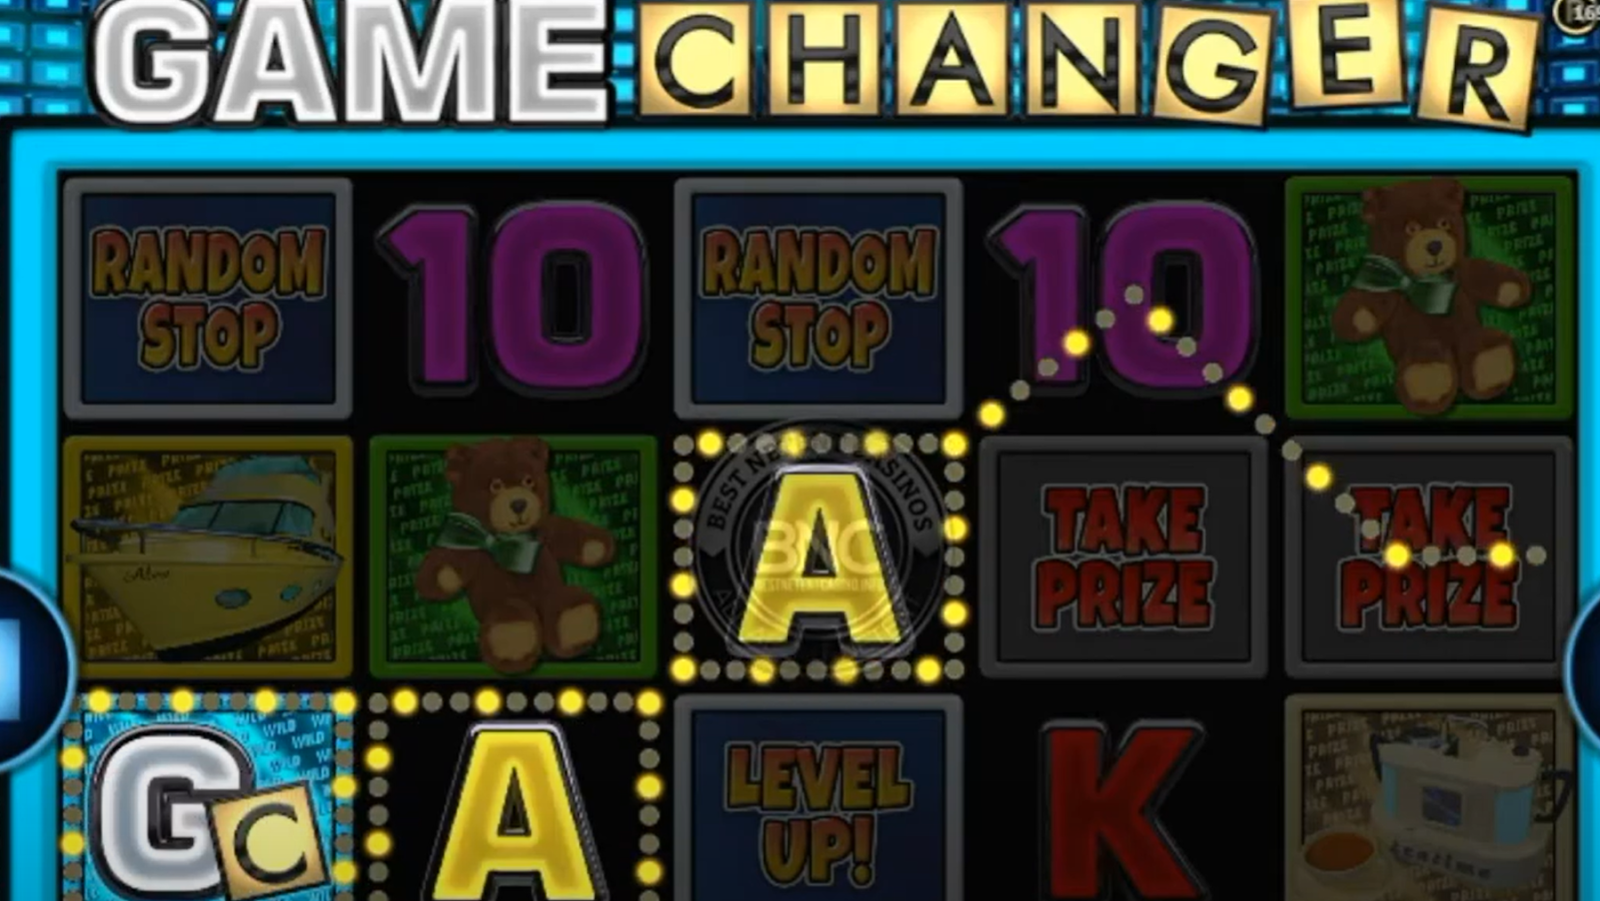 Game Changer is one of the best new casino games you can play at Betfair Casino